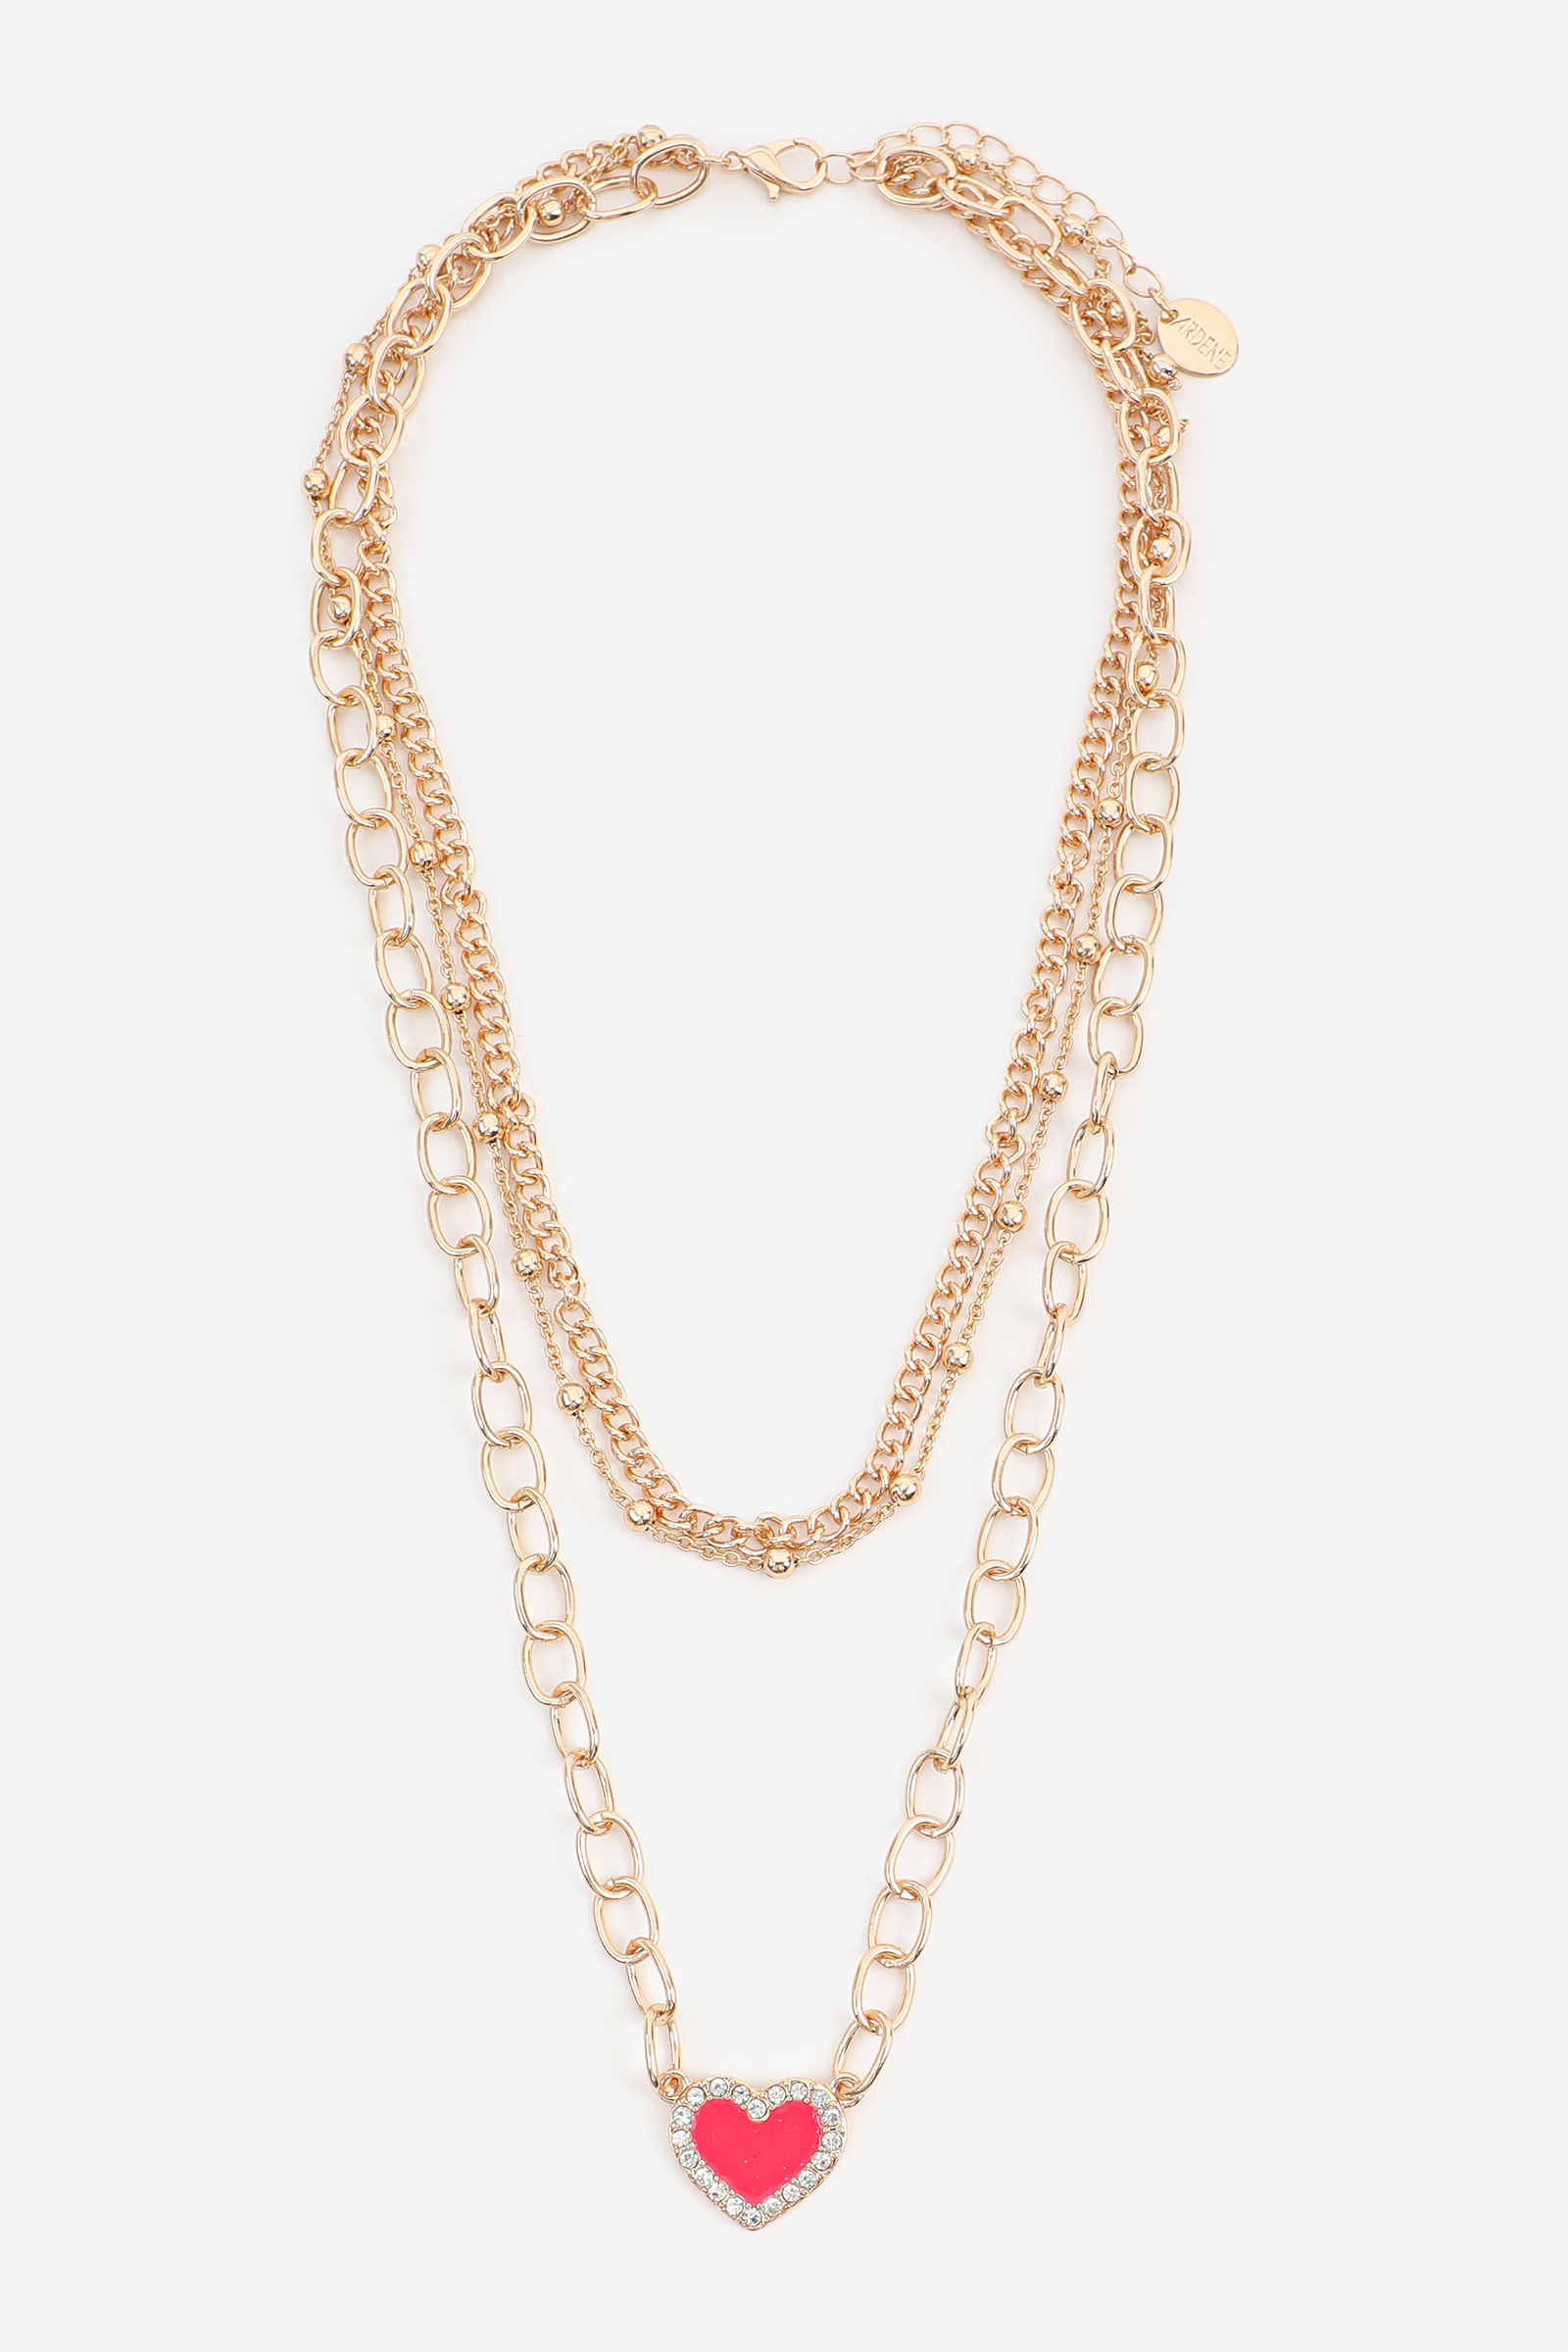 Ardene 3-Row Pink Heart Necklace in Gold